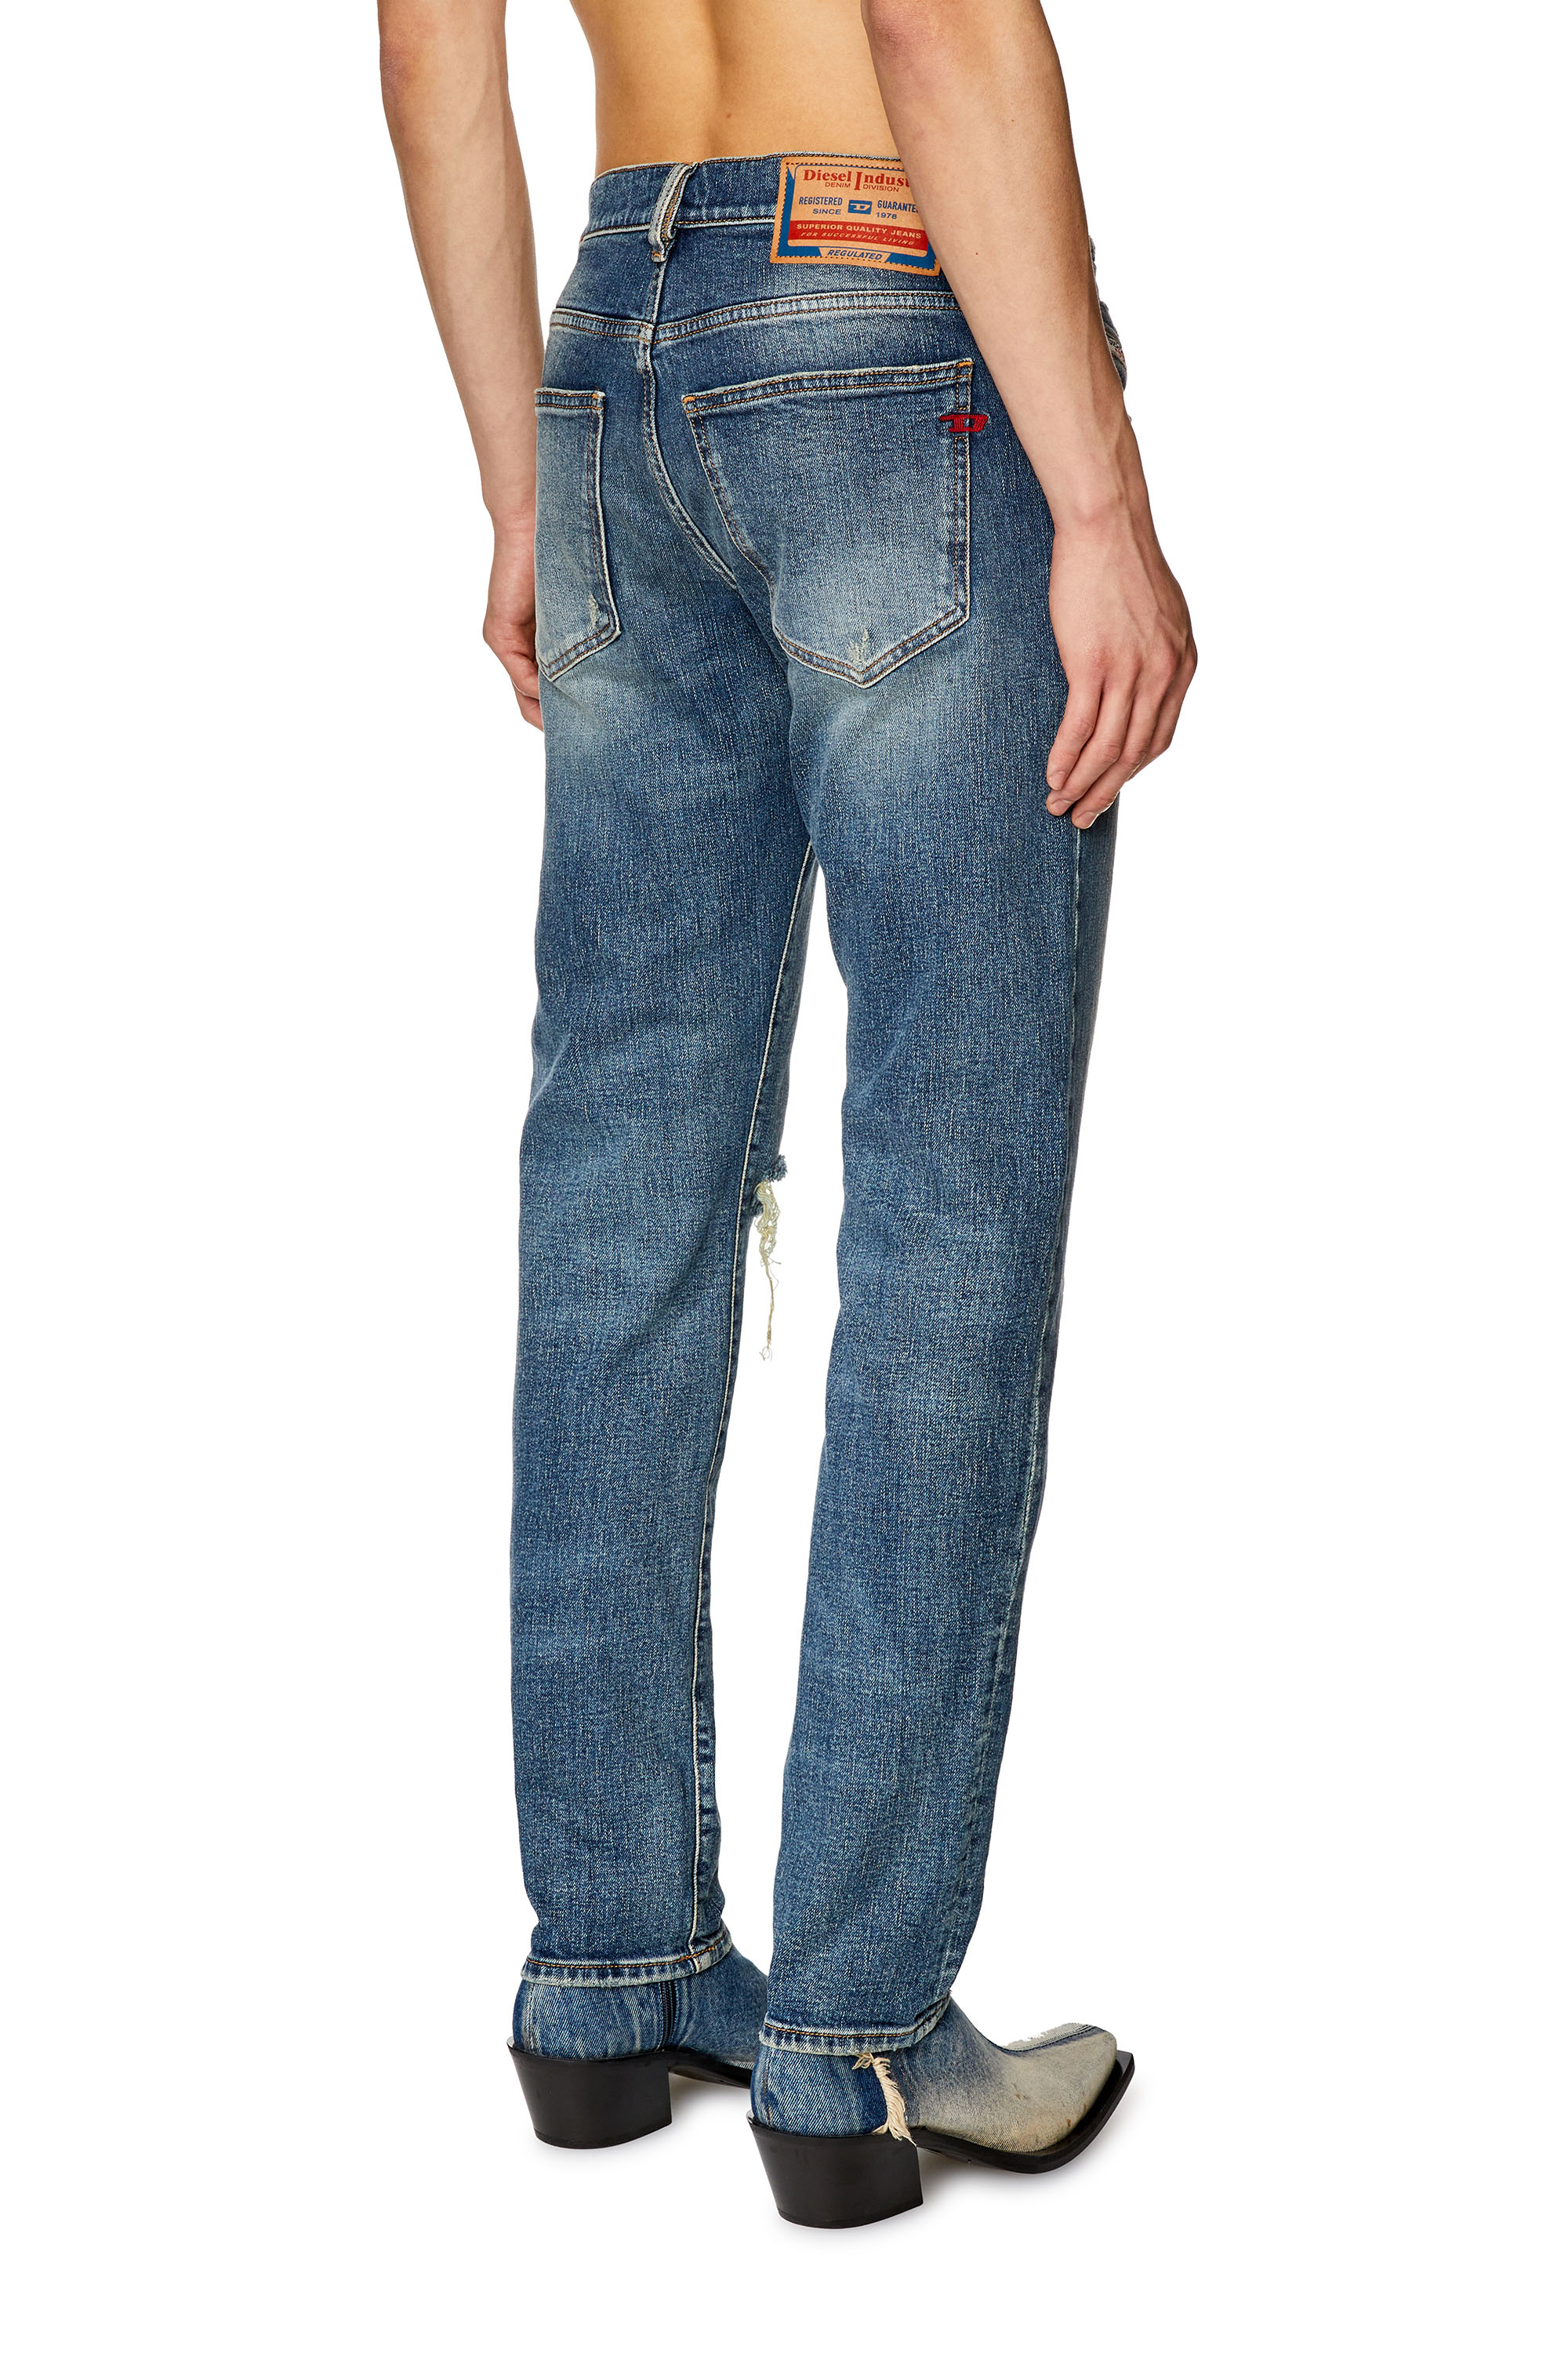 Diesel Online Store: jeans, clothing, shoes, bags and watches